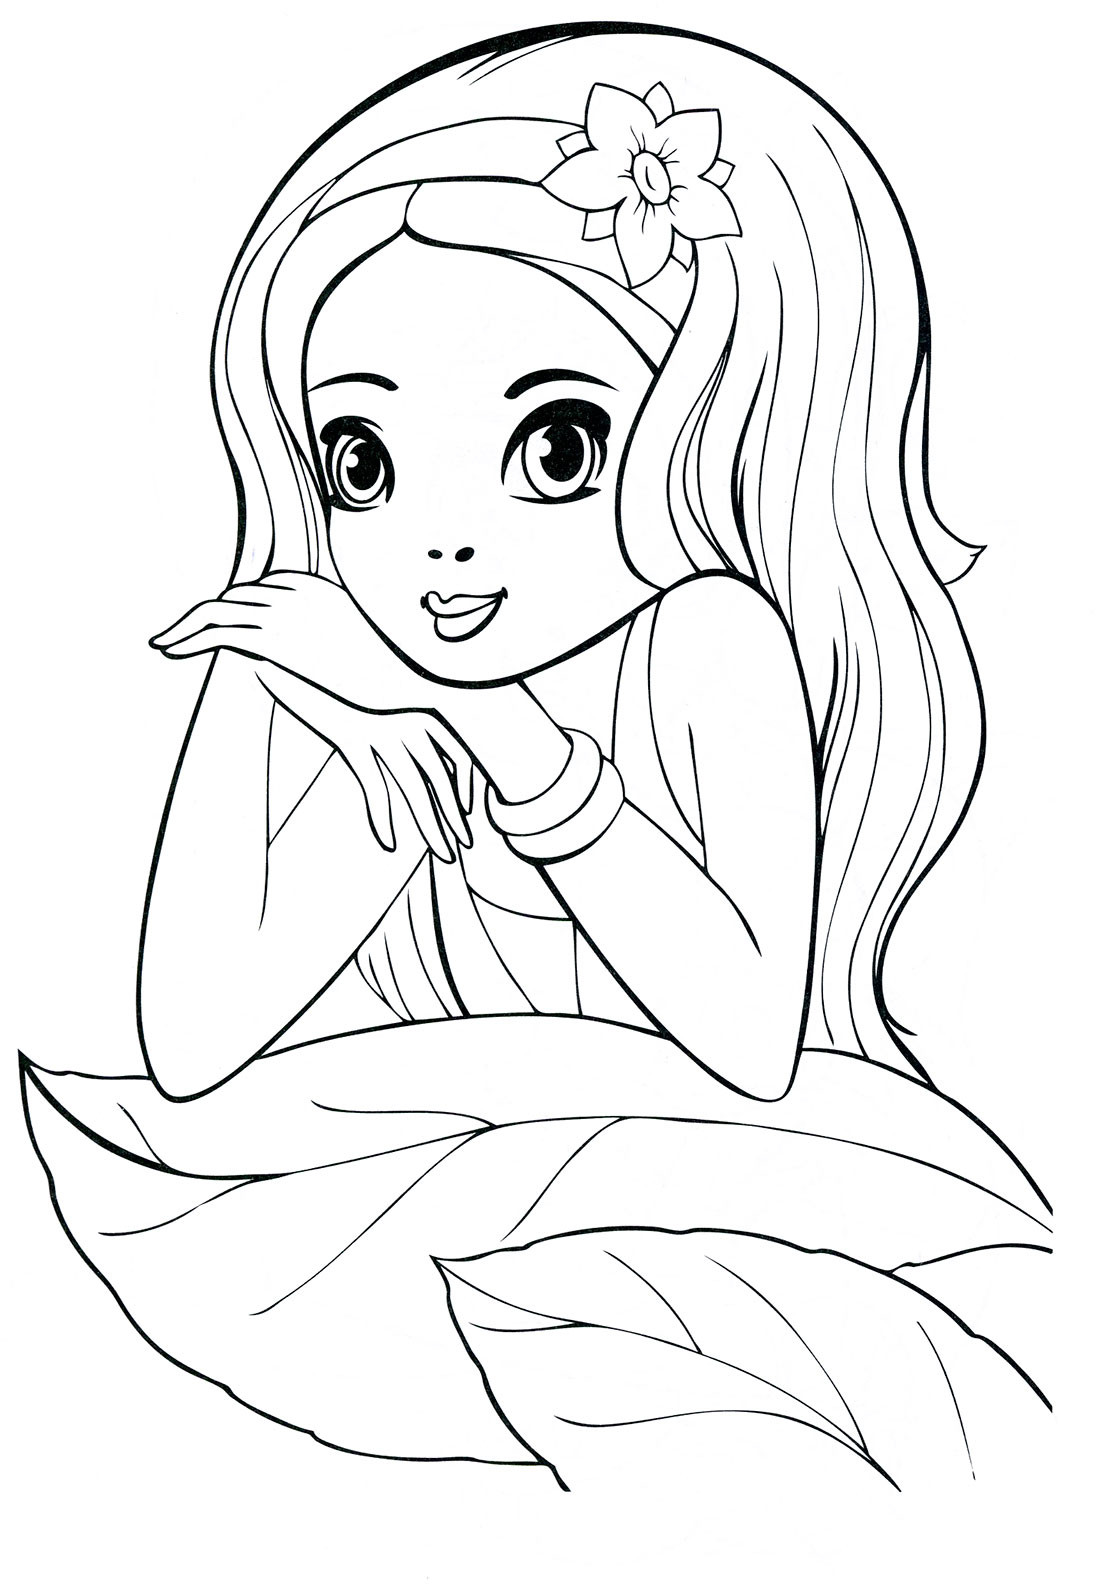 Coloring Book For Girls
 Coloring pages for 8 9 10 year old girls to and